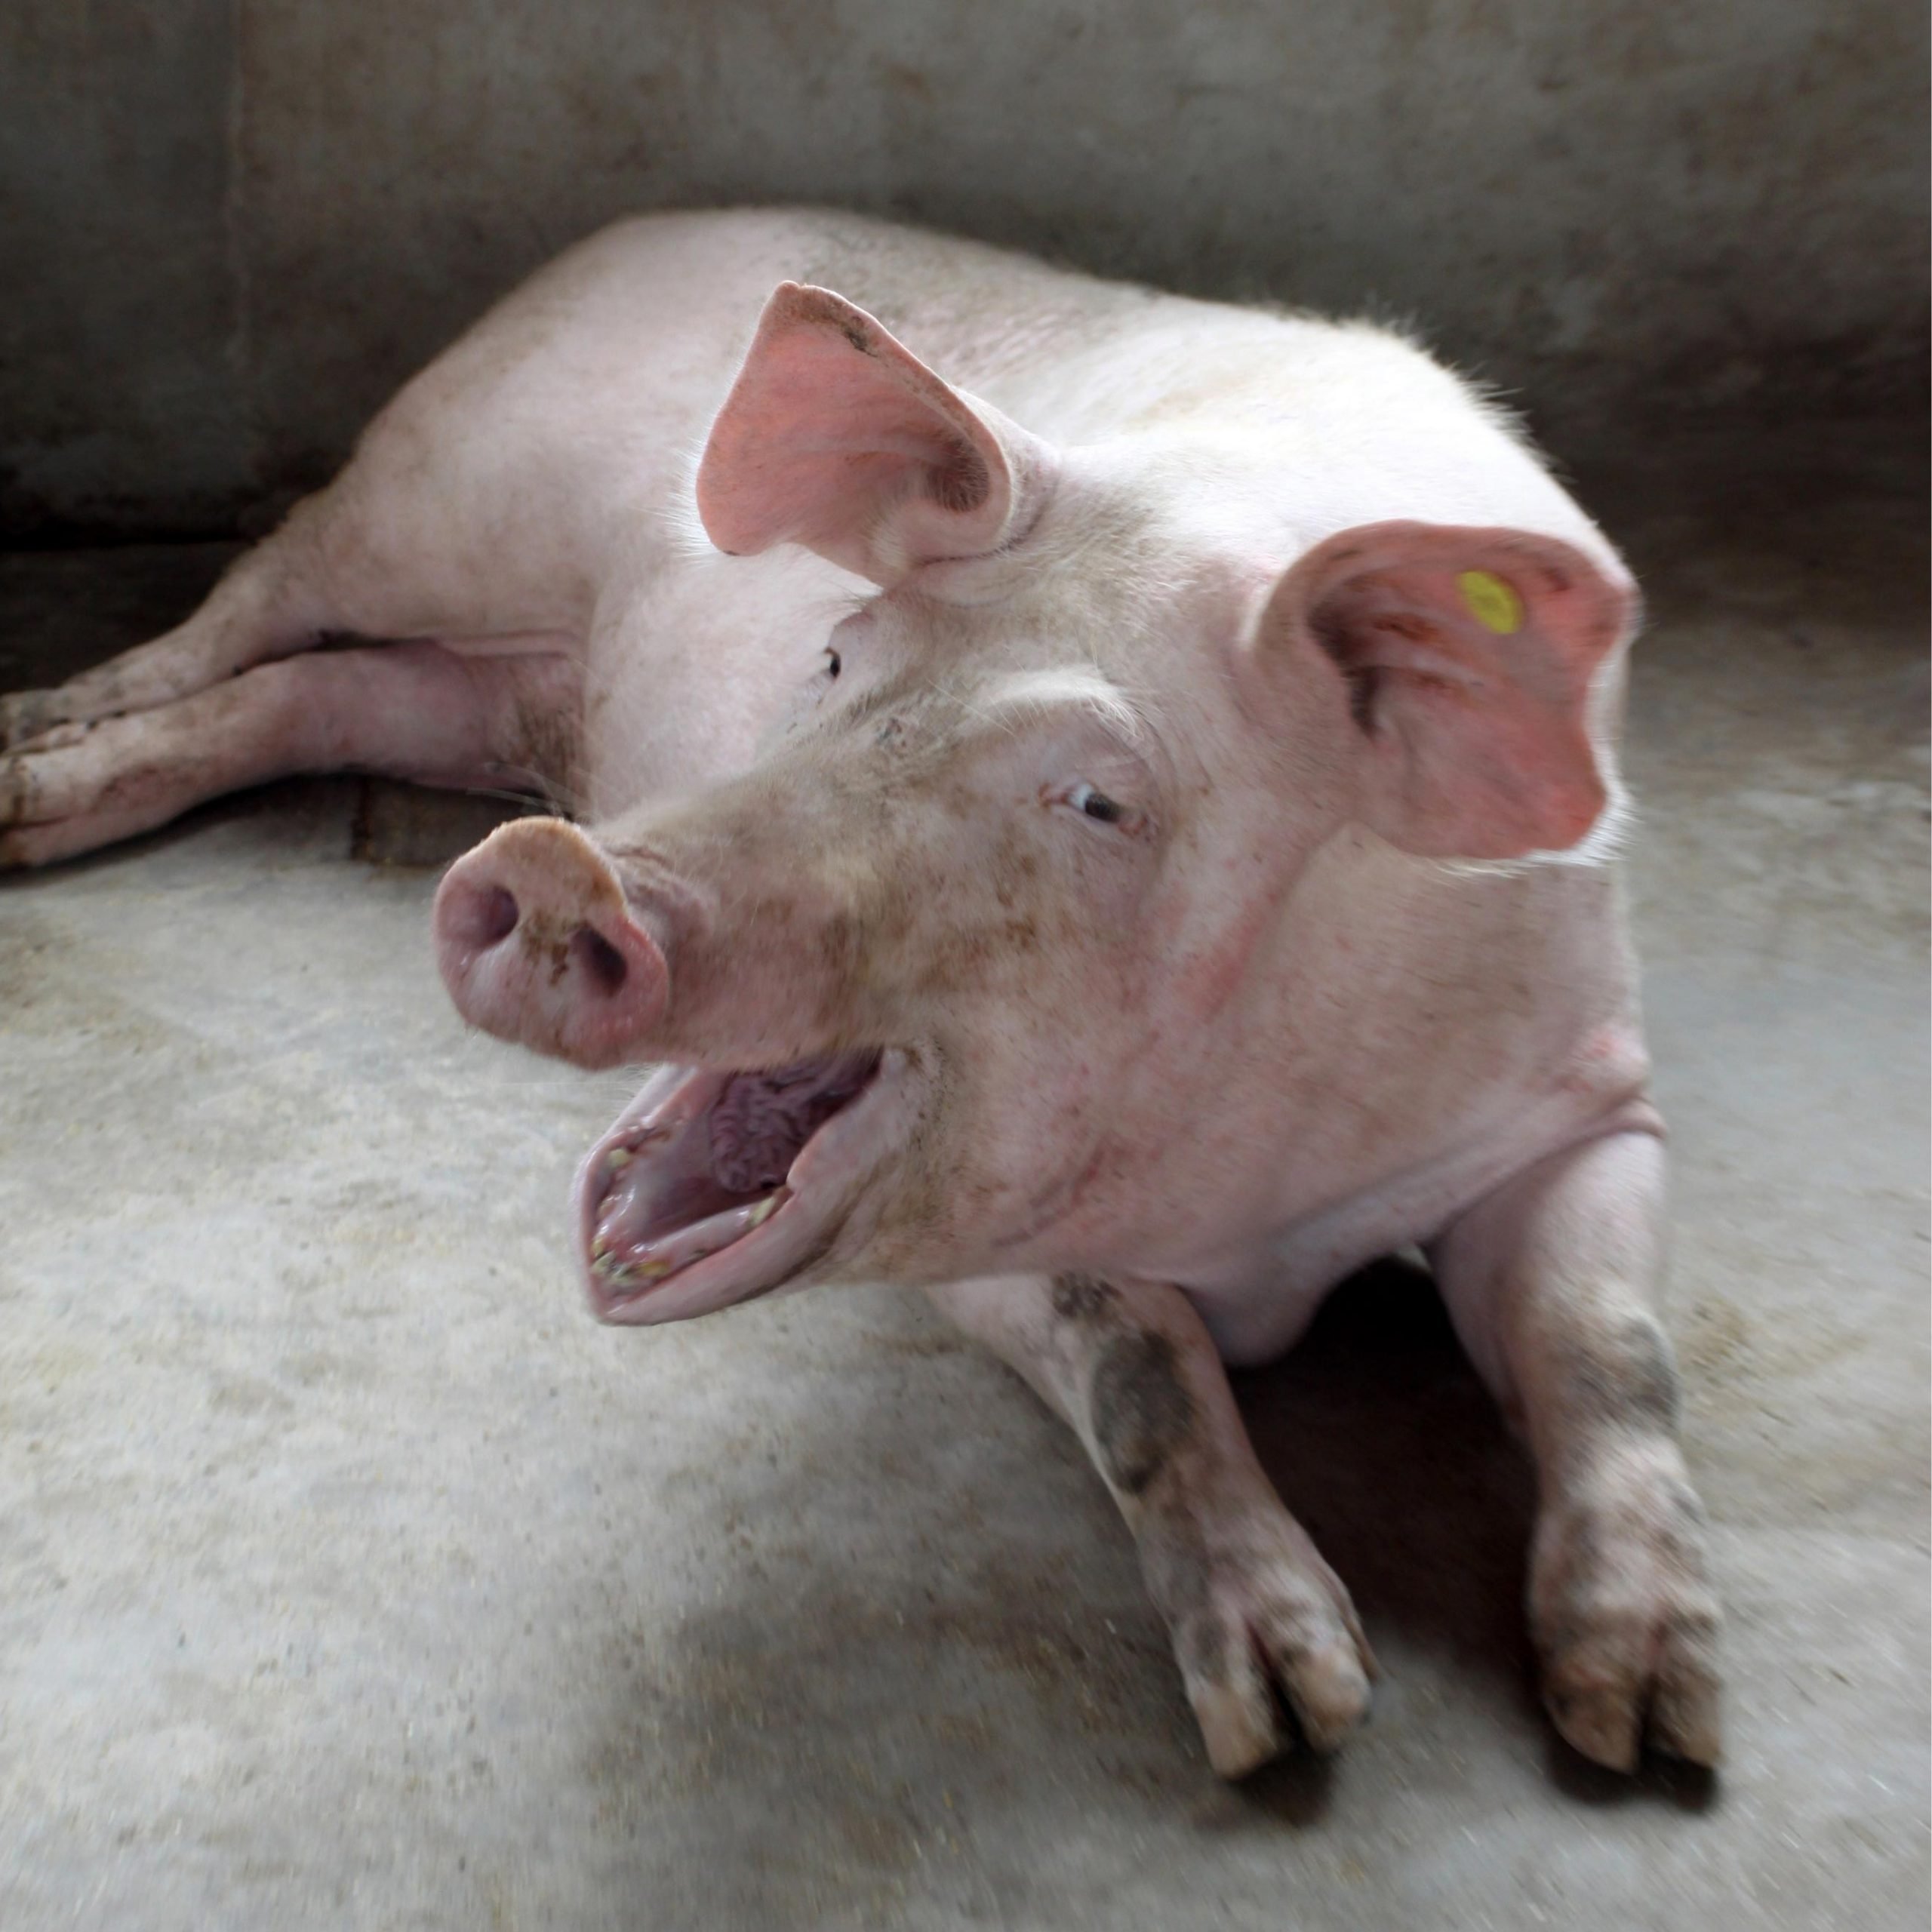 Scientists Can Now Decode Pigs' Emotions From the Sound of Their Grunts